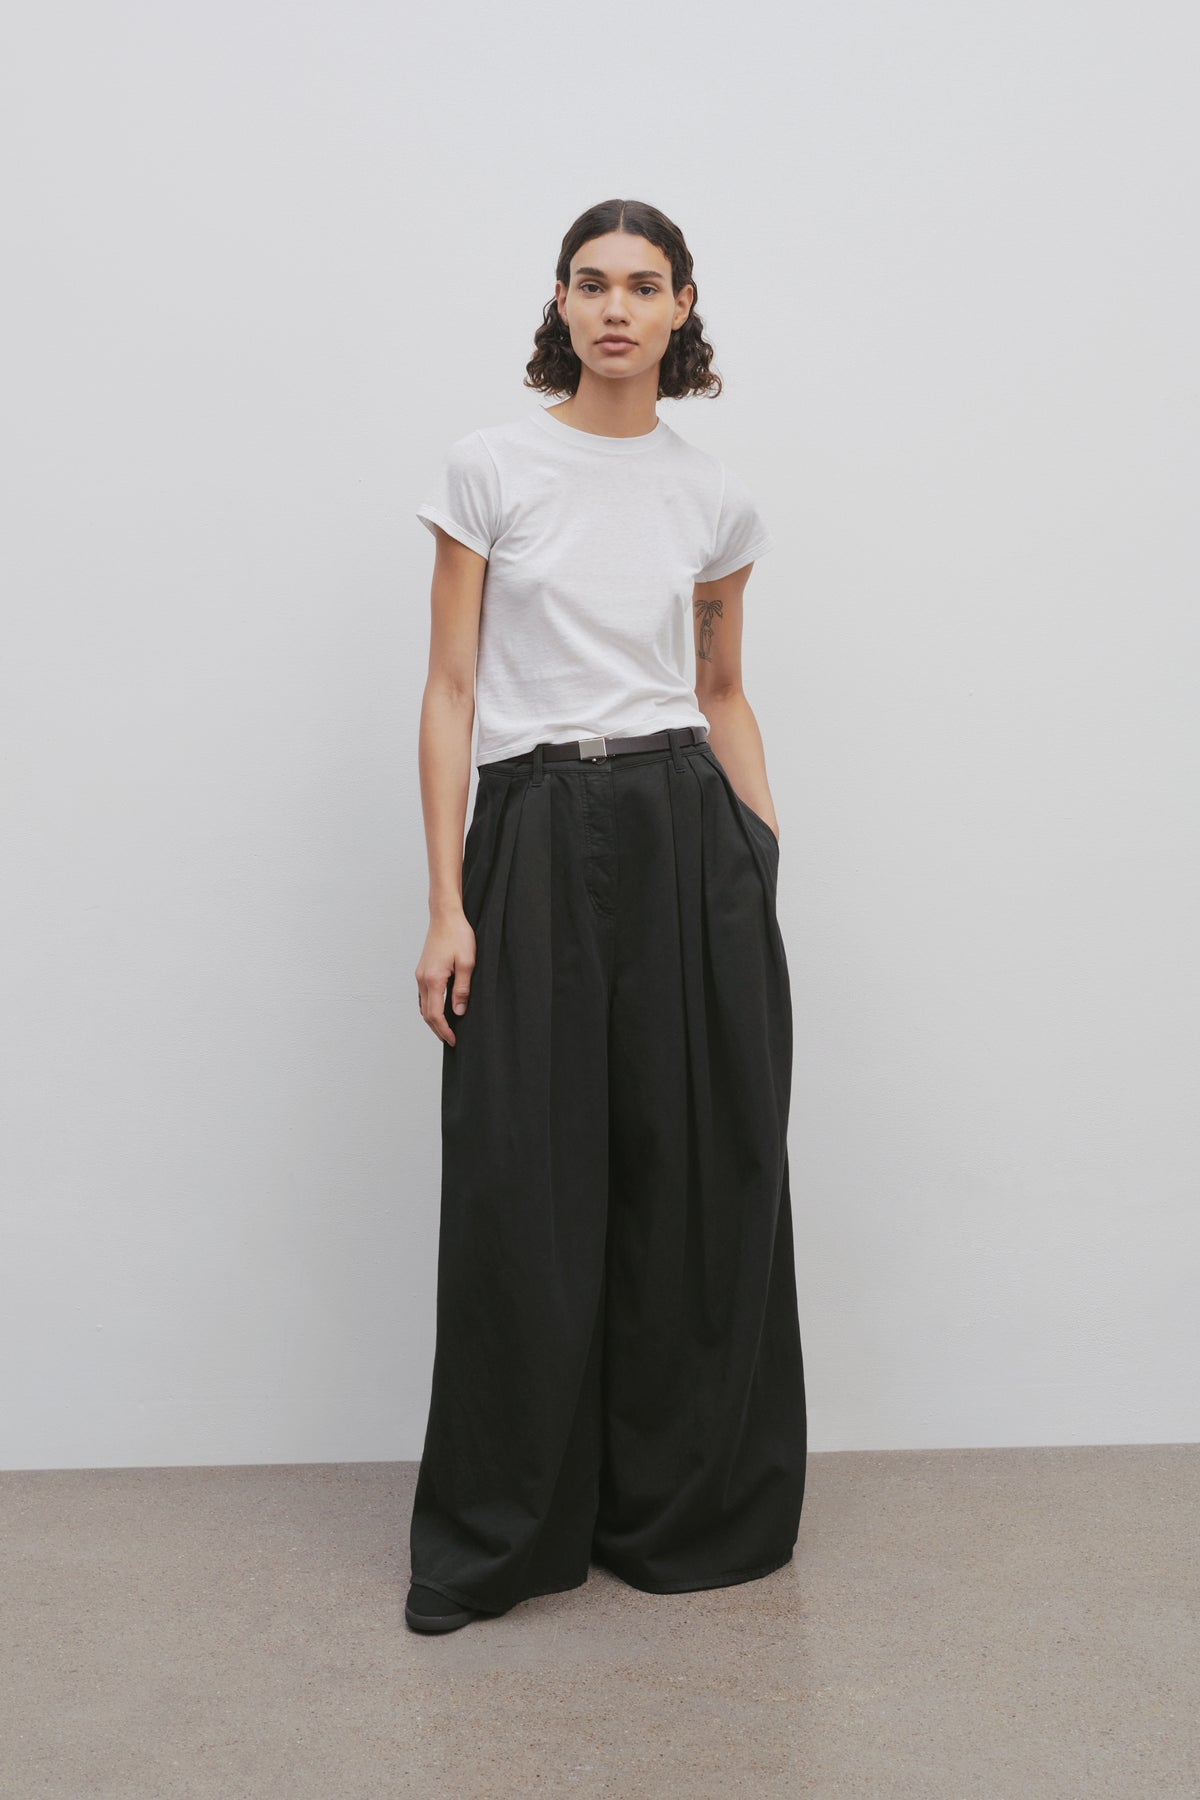 Criselle Jean in Cotton and Linen